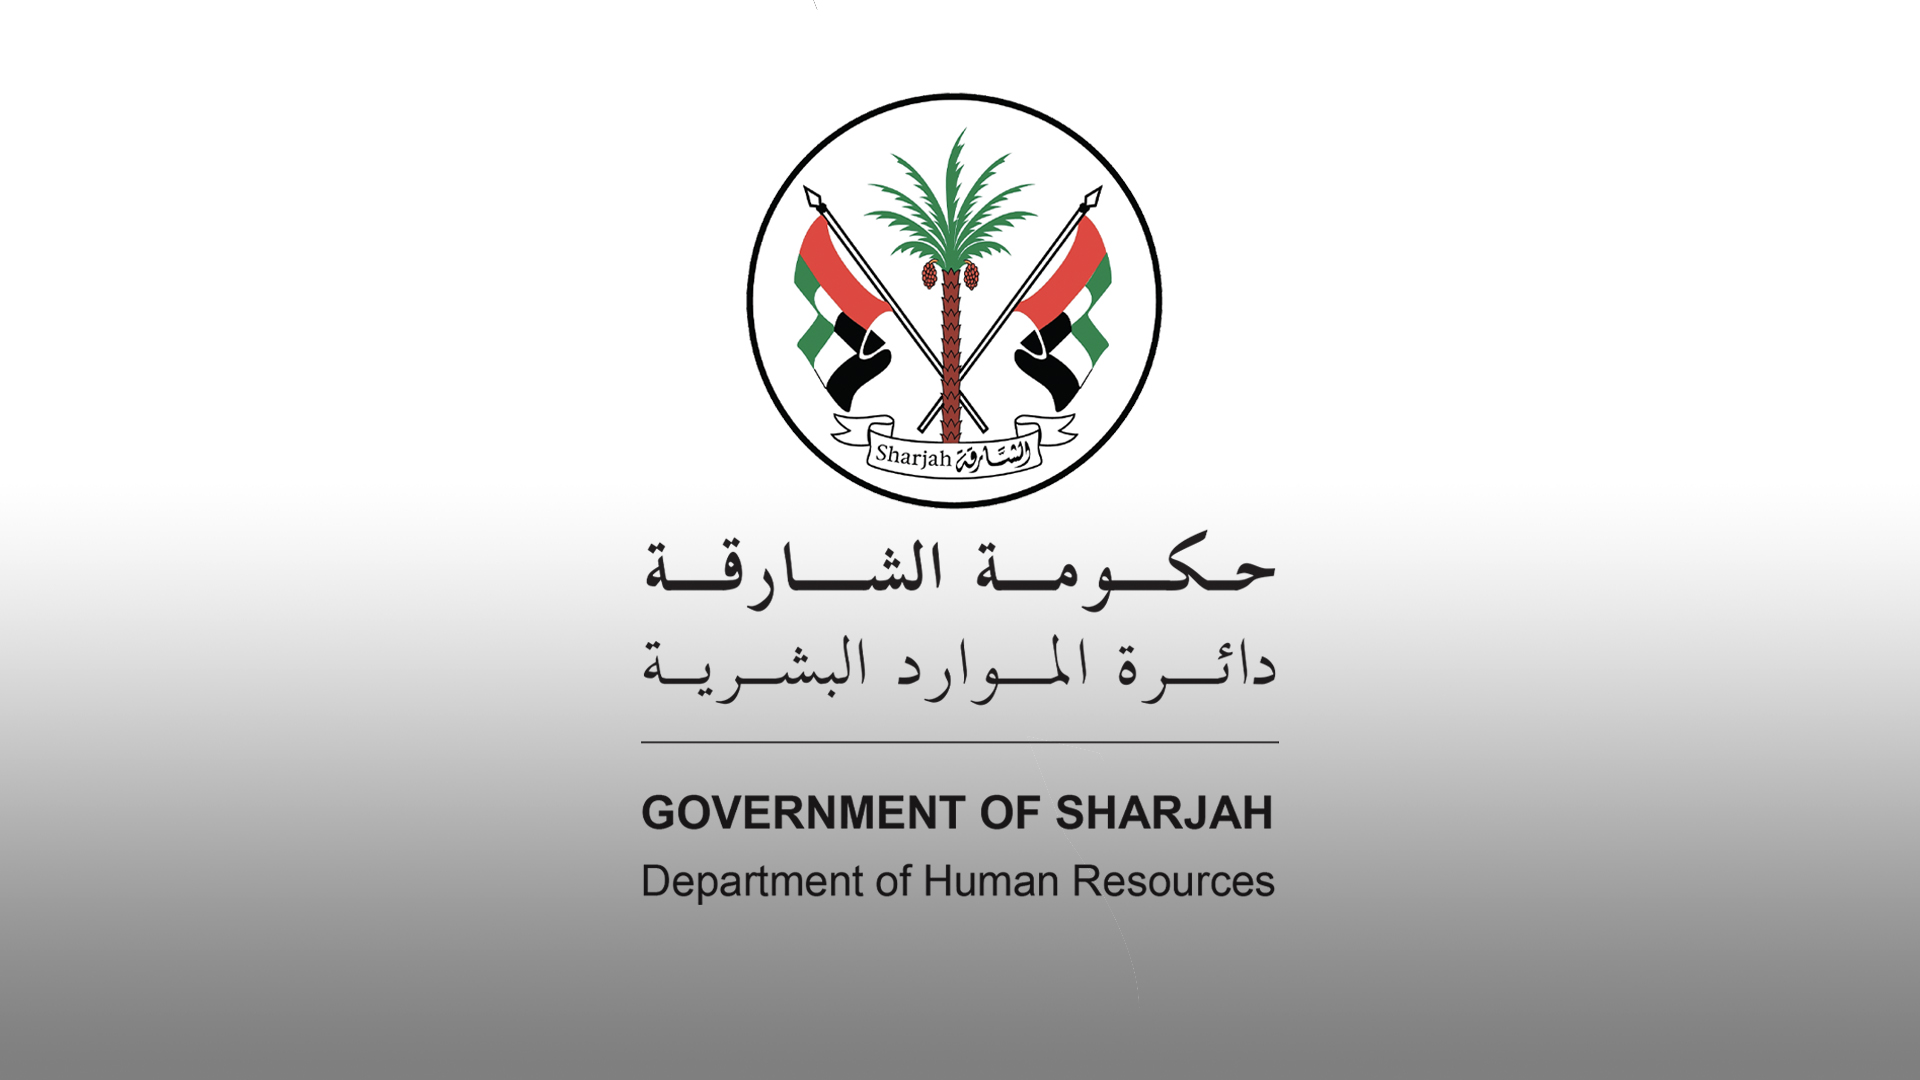 Remote work for Sharjah government employees tomorrow, Tuesday